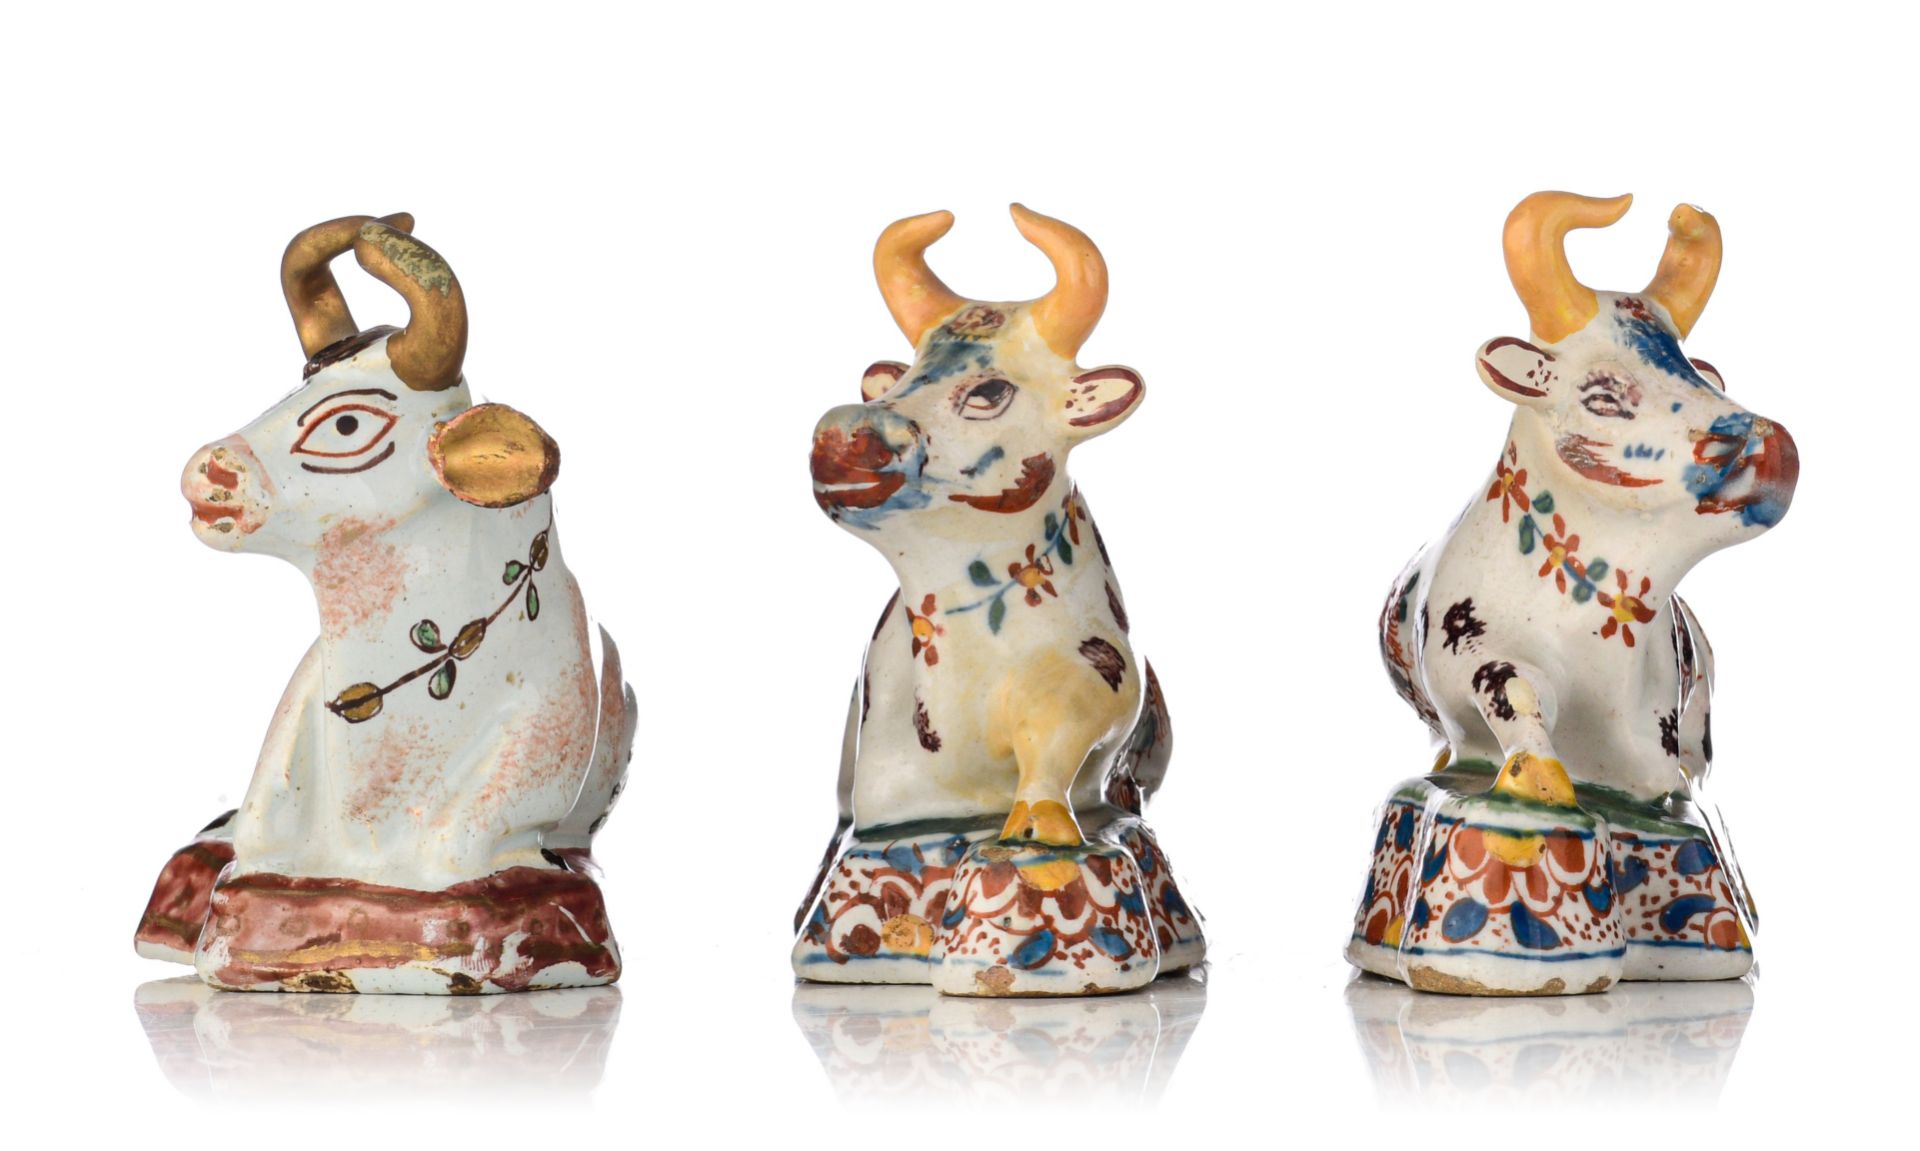 A pair of and a ditto Dutch Delft polychrome figure of a recumbent cow, 18thC, H 8-9 cm - Image 4 of 15